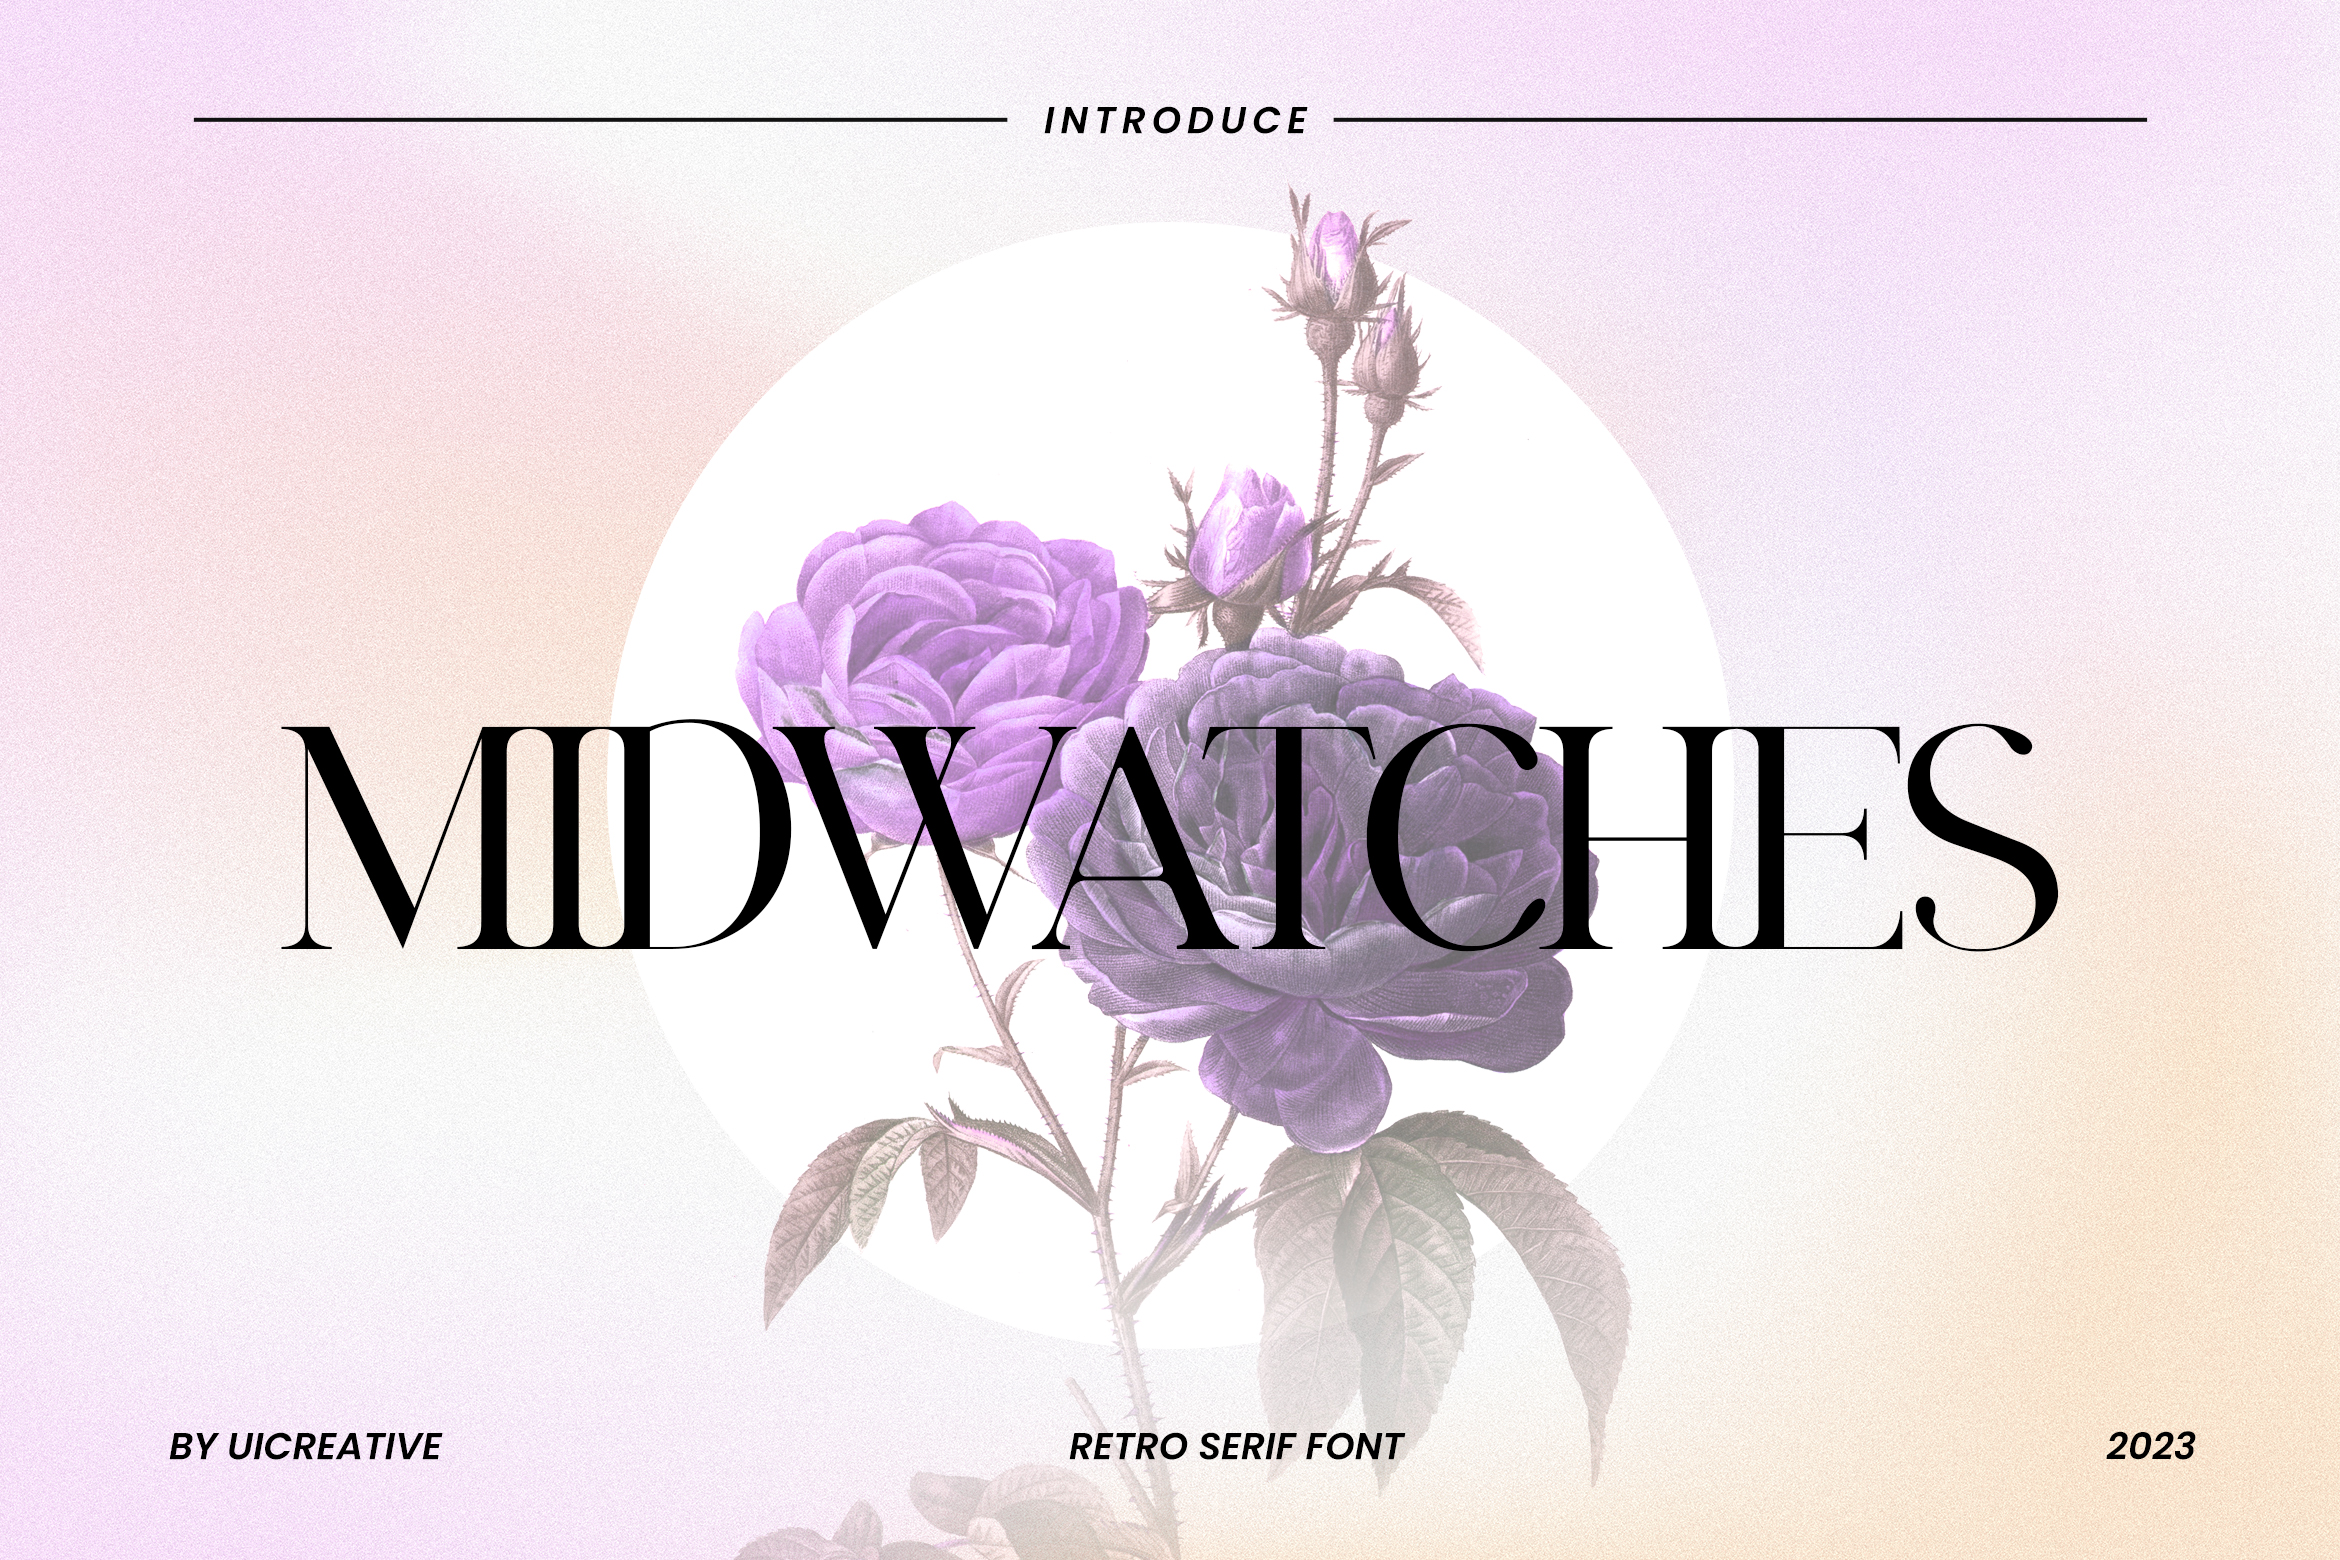 MIDWATCHES